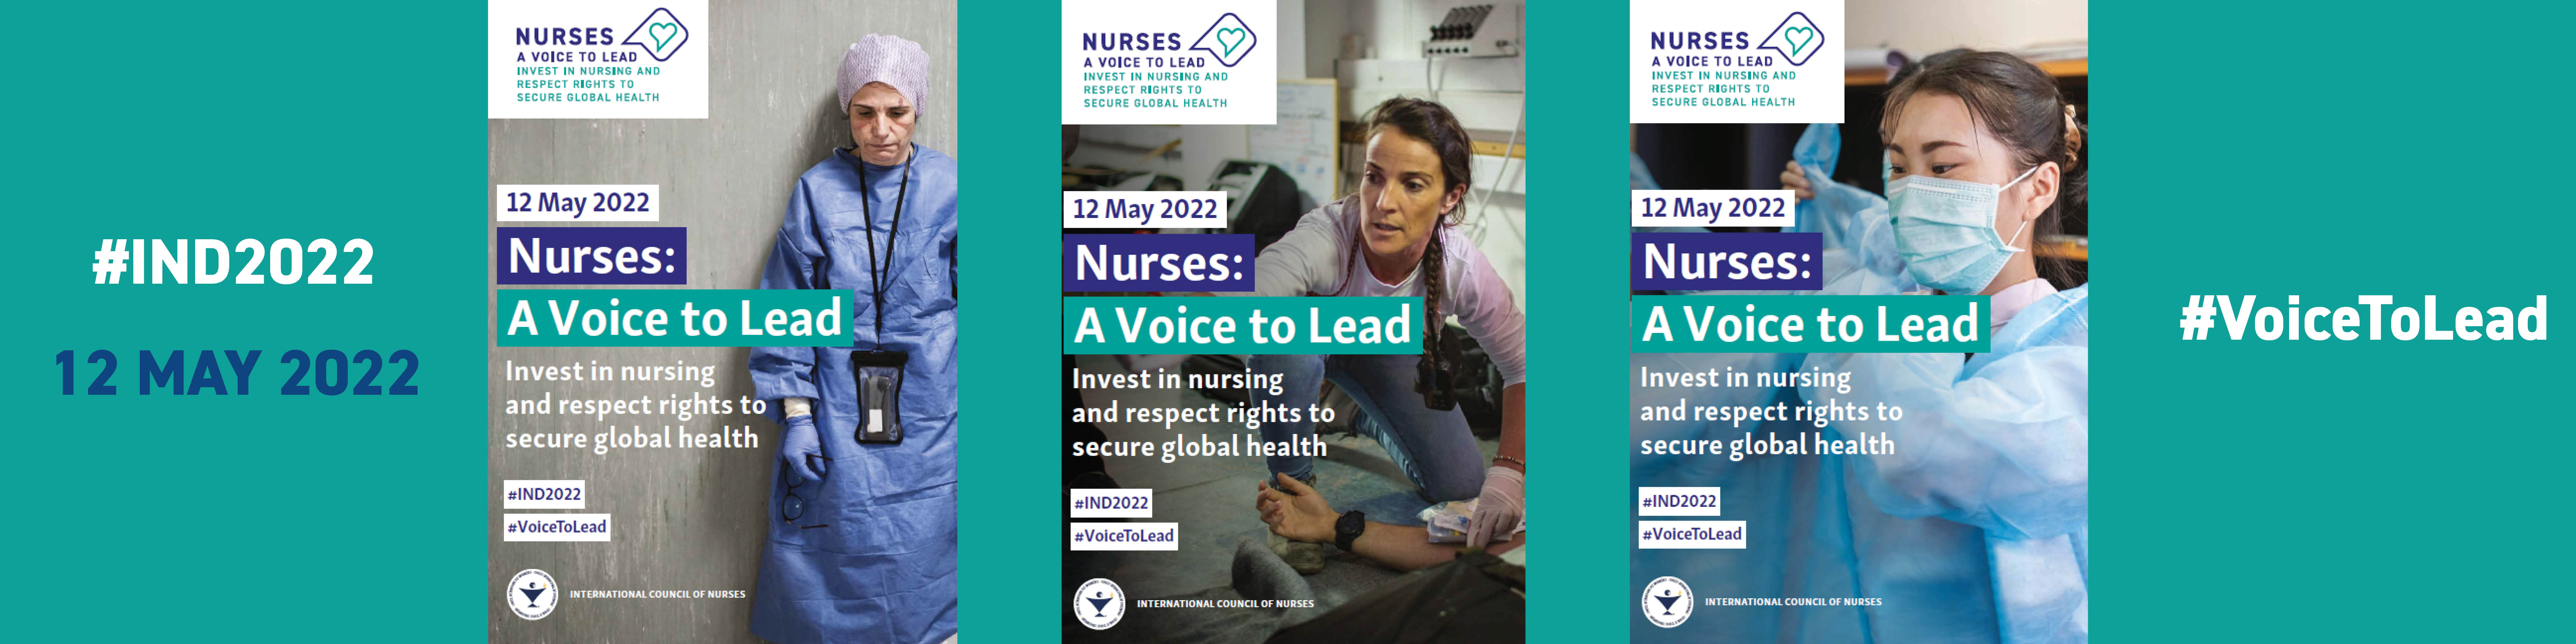 International Council of Nurses releases posters, digital promotional